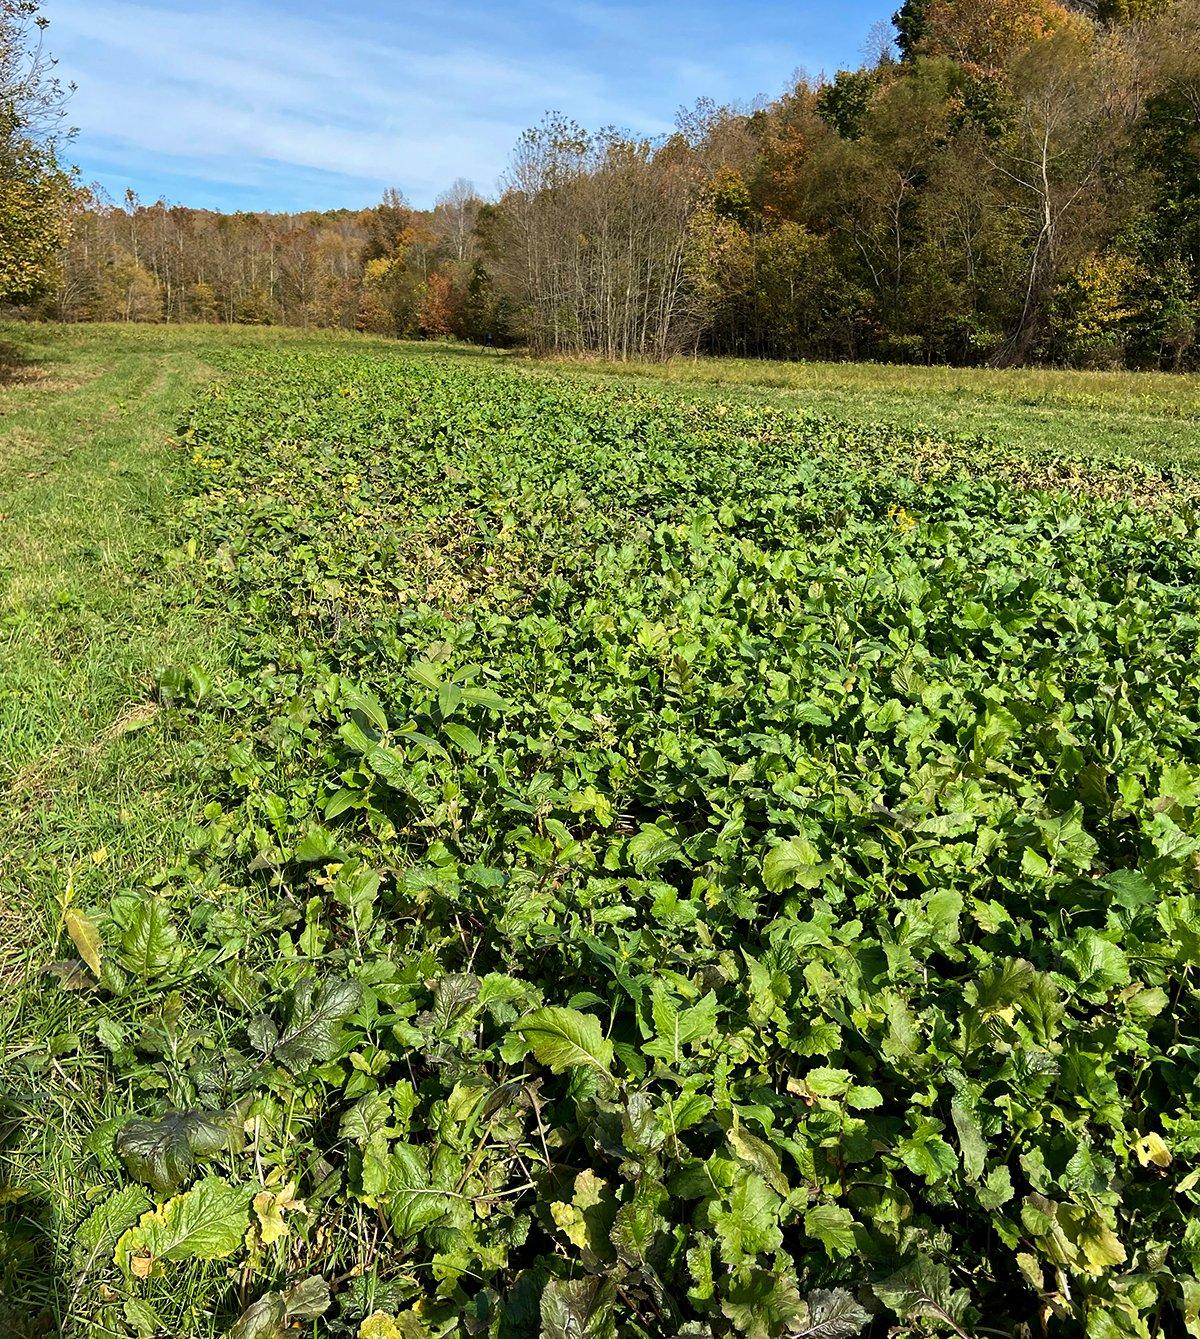 A lush, green brassicas plot ready for deer and deer hunting. Image by Will Brantley